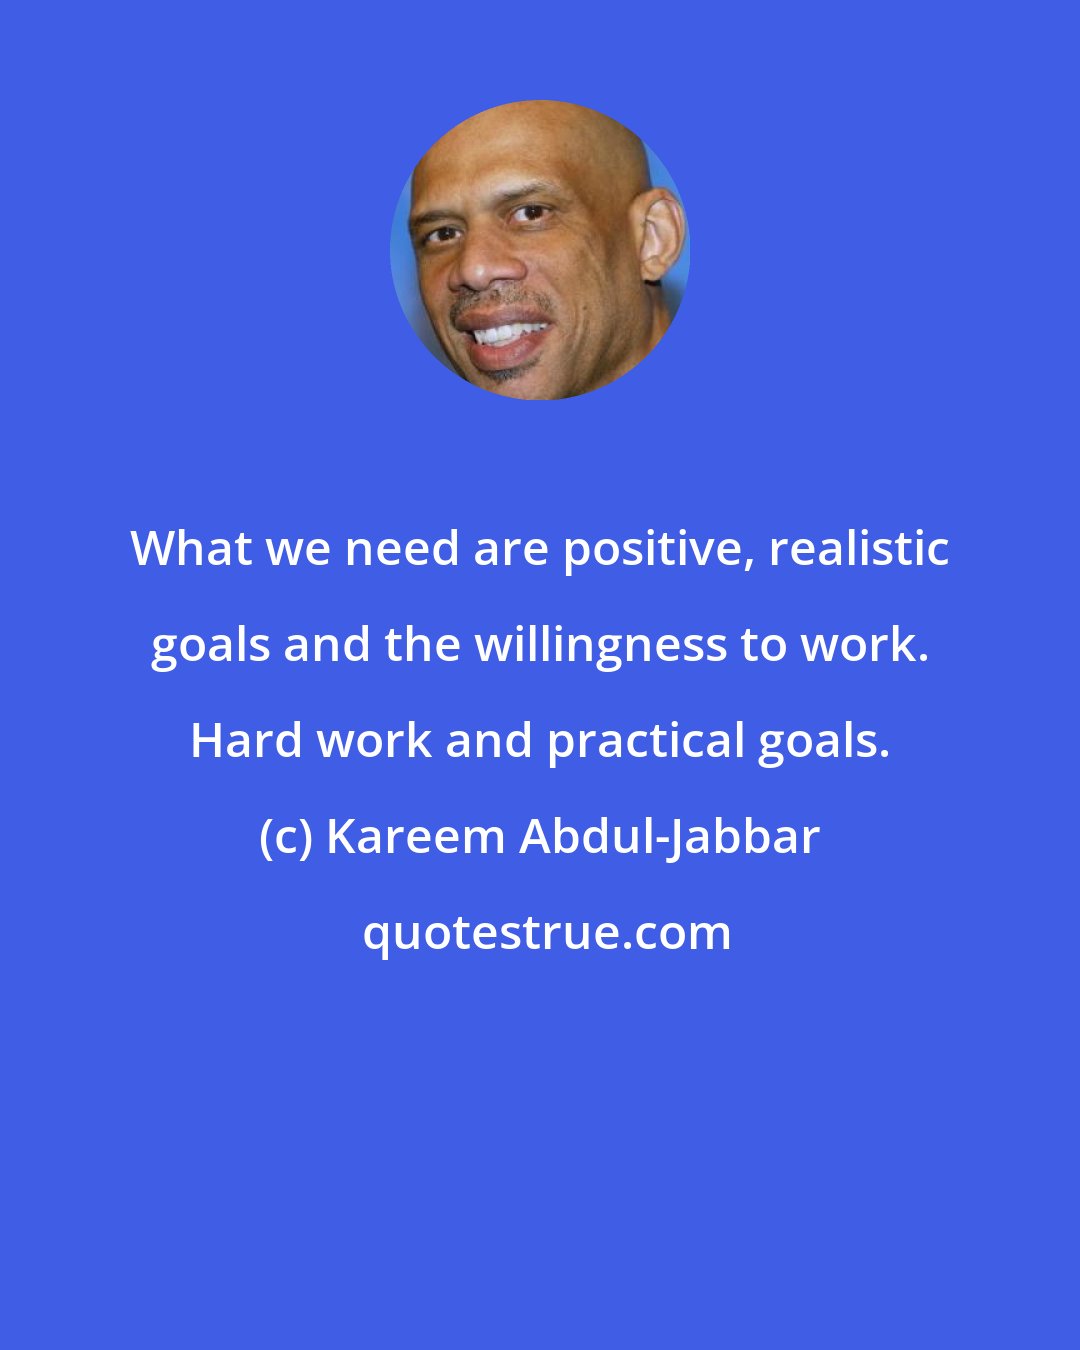 Kareem Abdul-Jabbar: What we need are positive, realistic goals and the willingness to work. Hard work and practical goals.